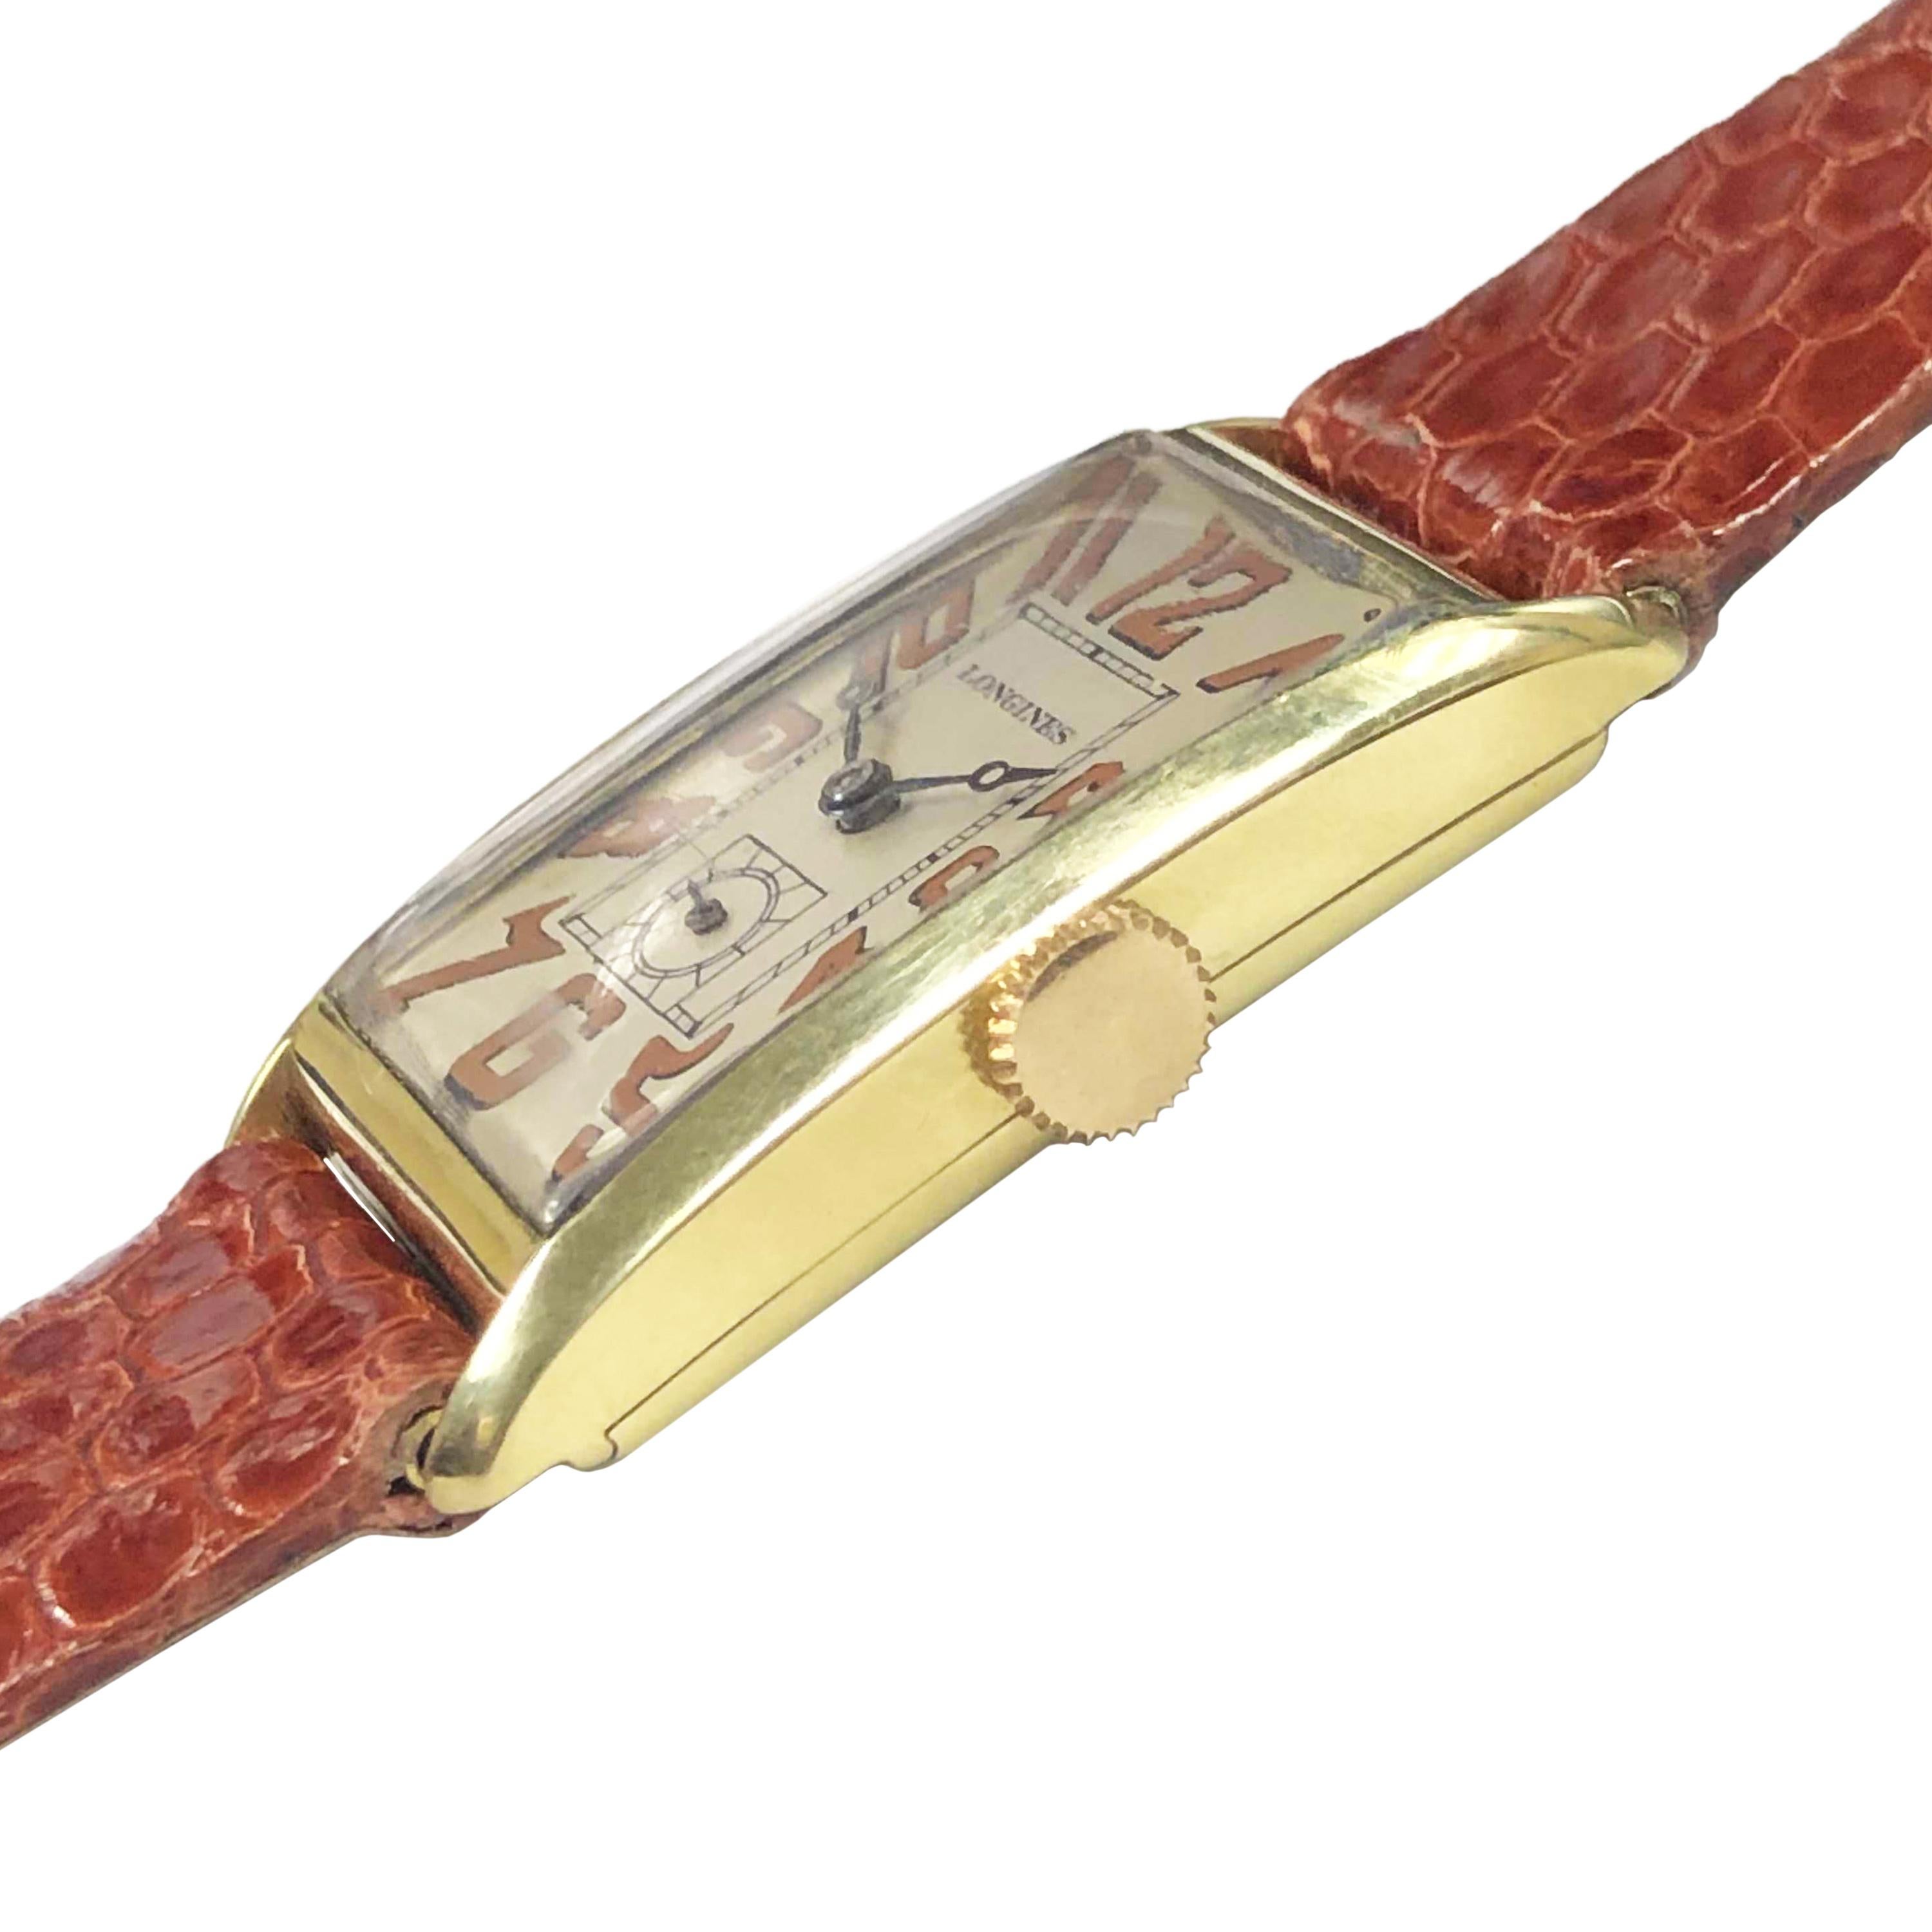 Circa 1930 Longines Art Deco Wrist Watch, 39 X 22 MM 14K Yellow Gold Elongated case. 17 Jewel Nickle lever movement, silvered satin dial with exaggerated Luminous filled Arabic numbers and a sub seconds hand. New Brown Snake strap, recently servied